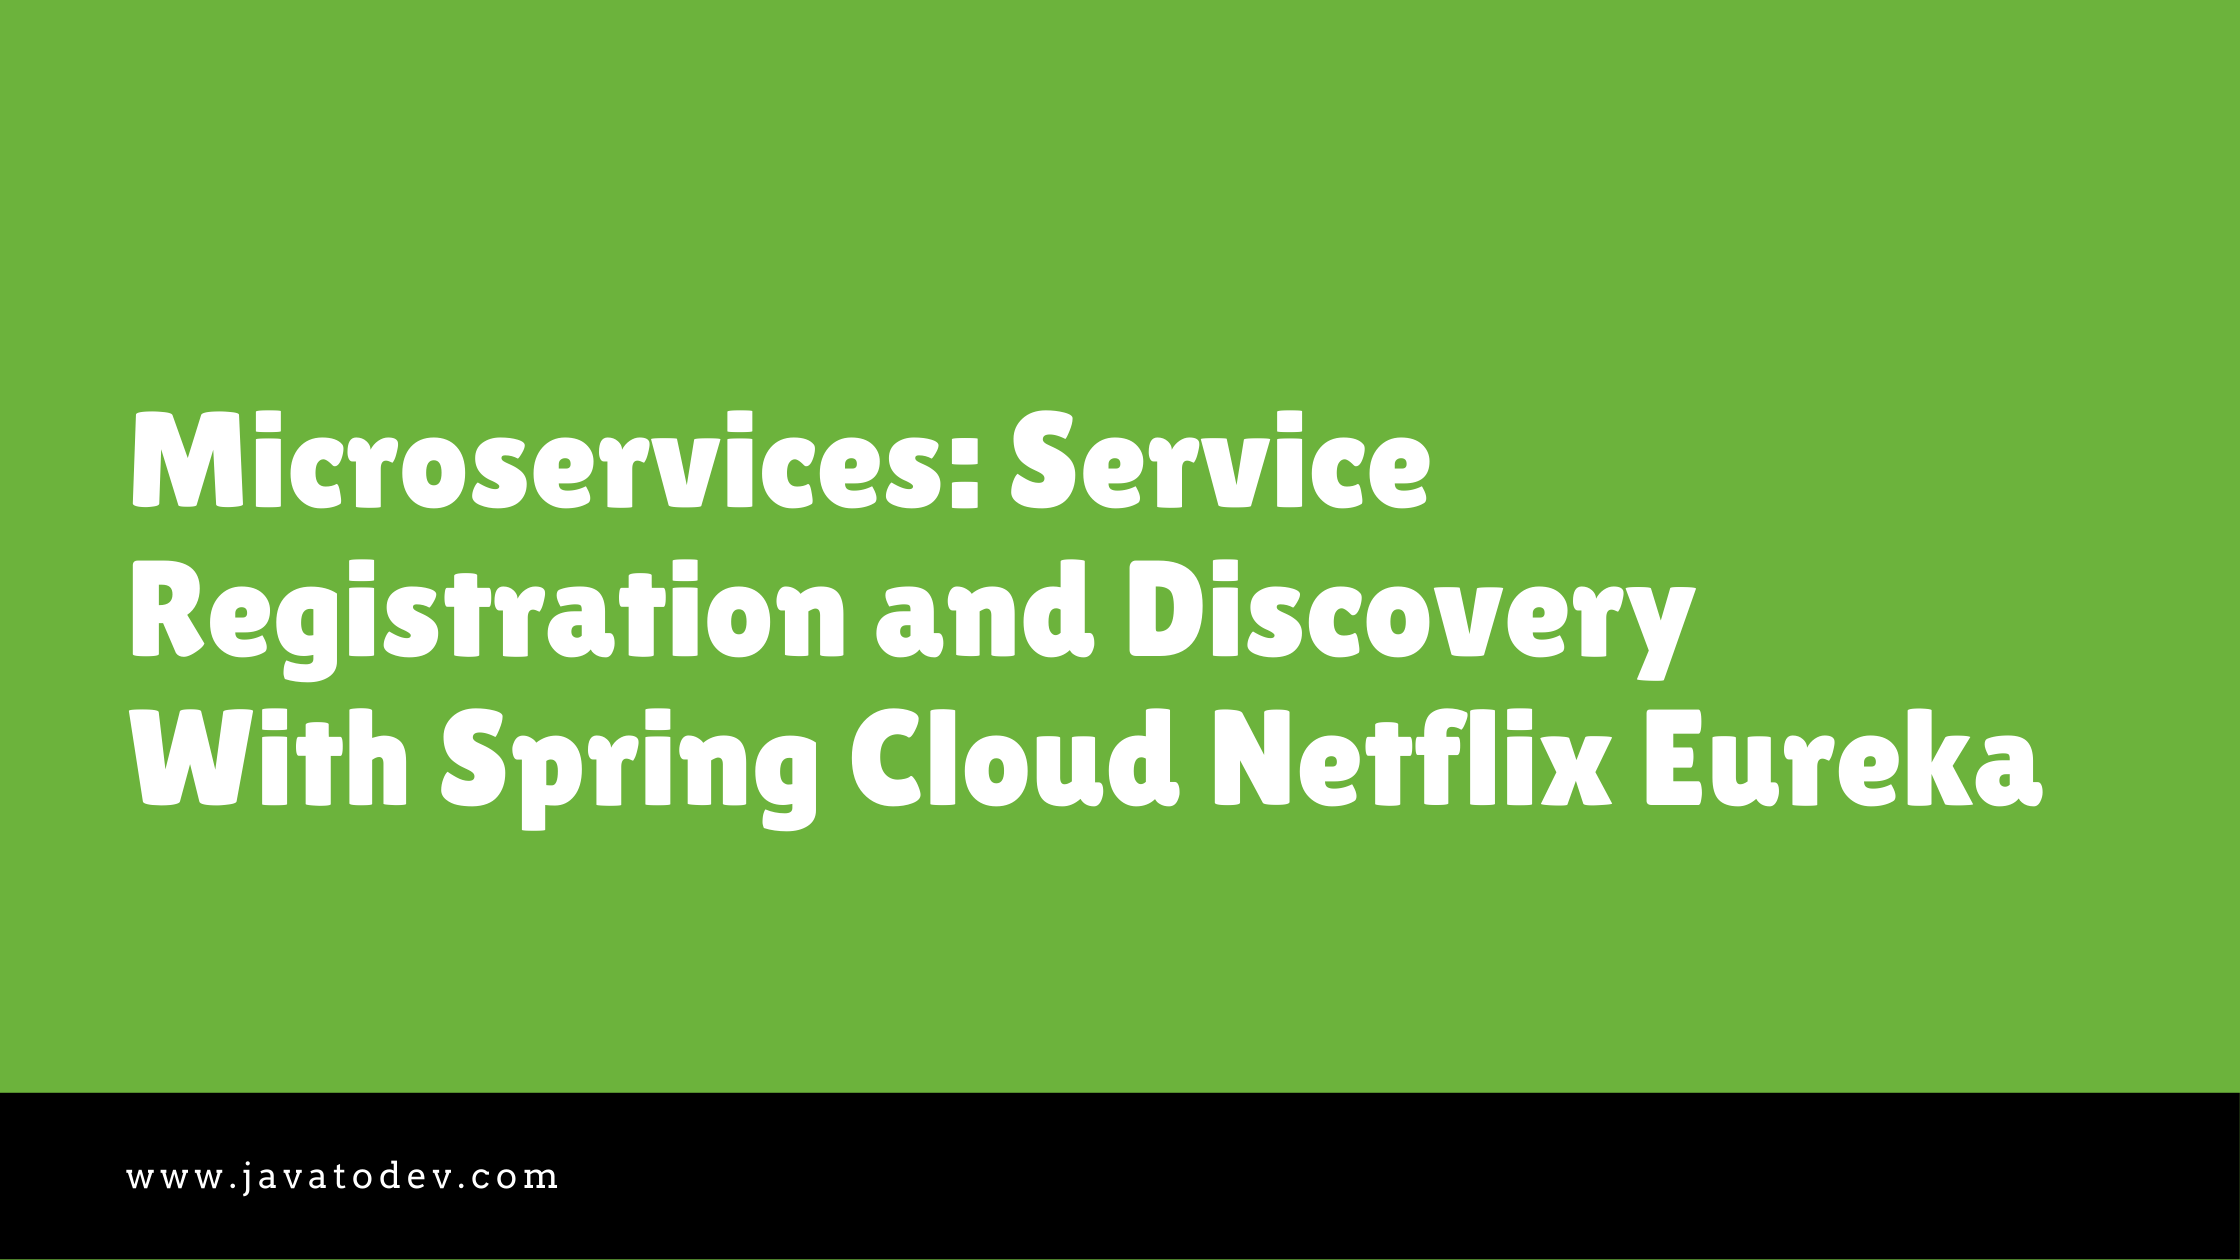 Microservices - Service Registration and Discovery With Spring Cloud Netflix Eureka